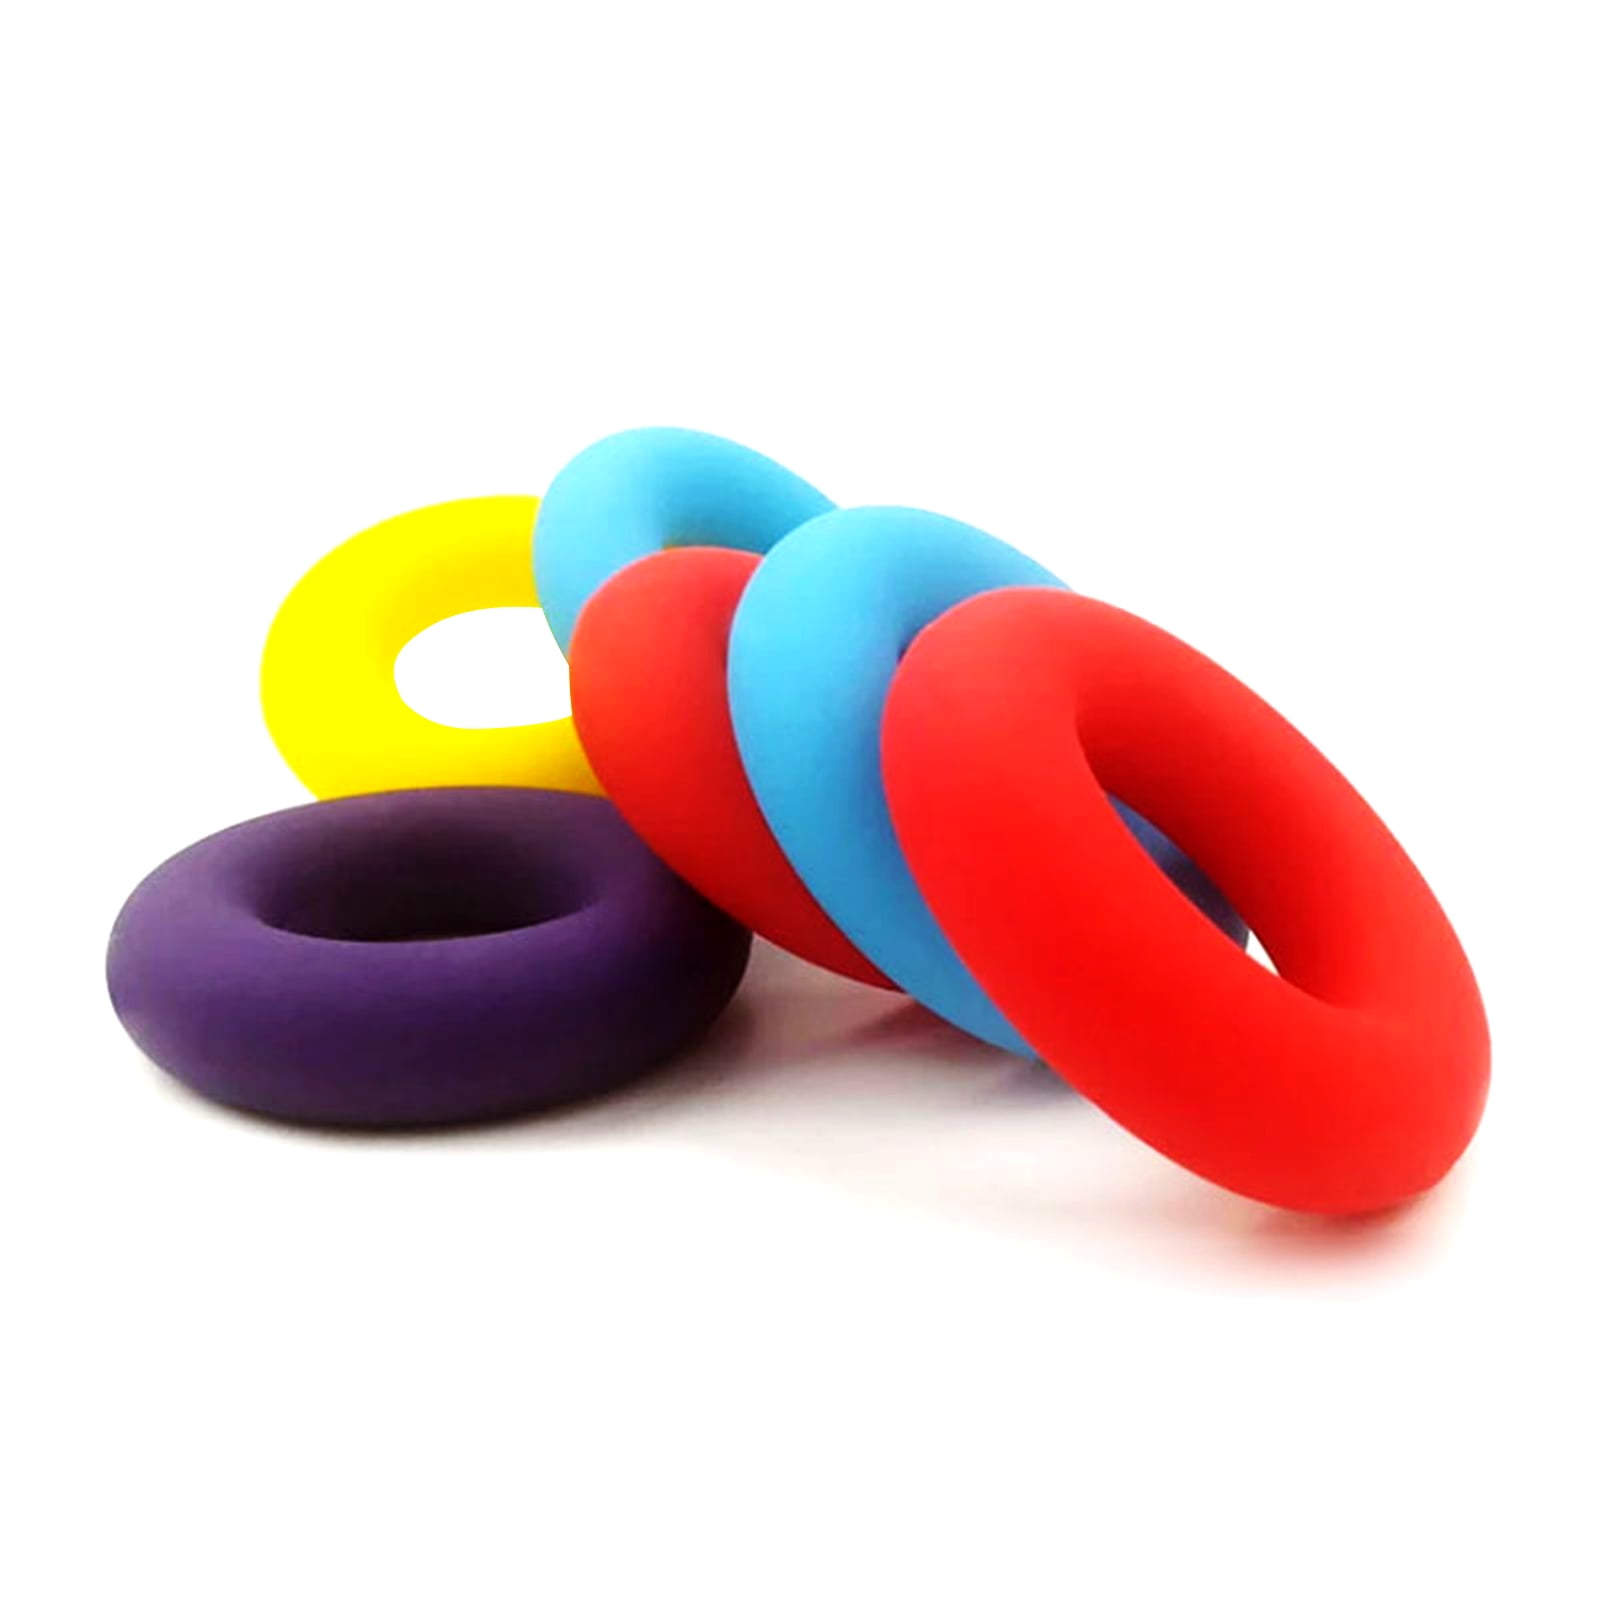 Strength Finger Hand Grip Muscle Power Training Rubber Ring Exerciser Silicone